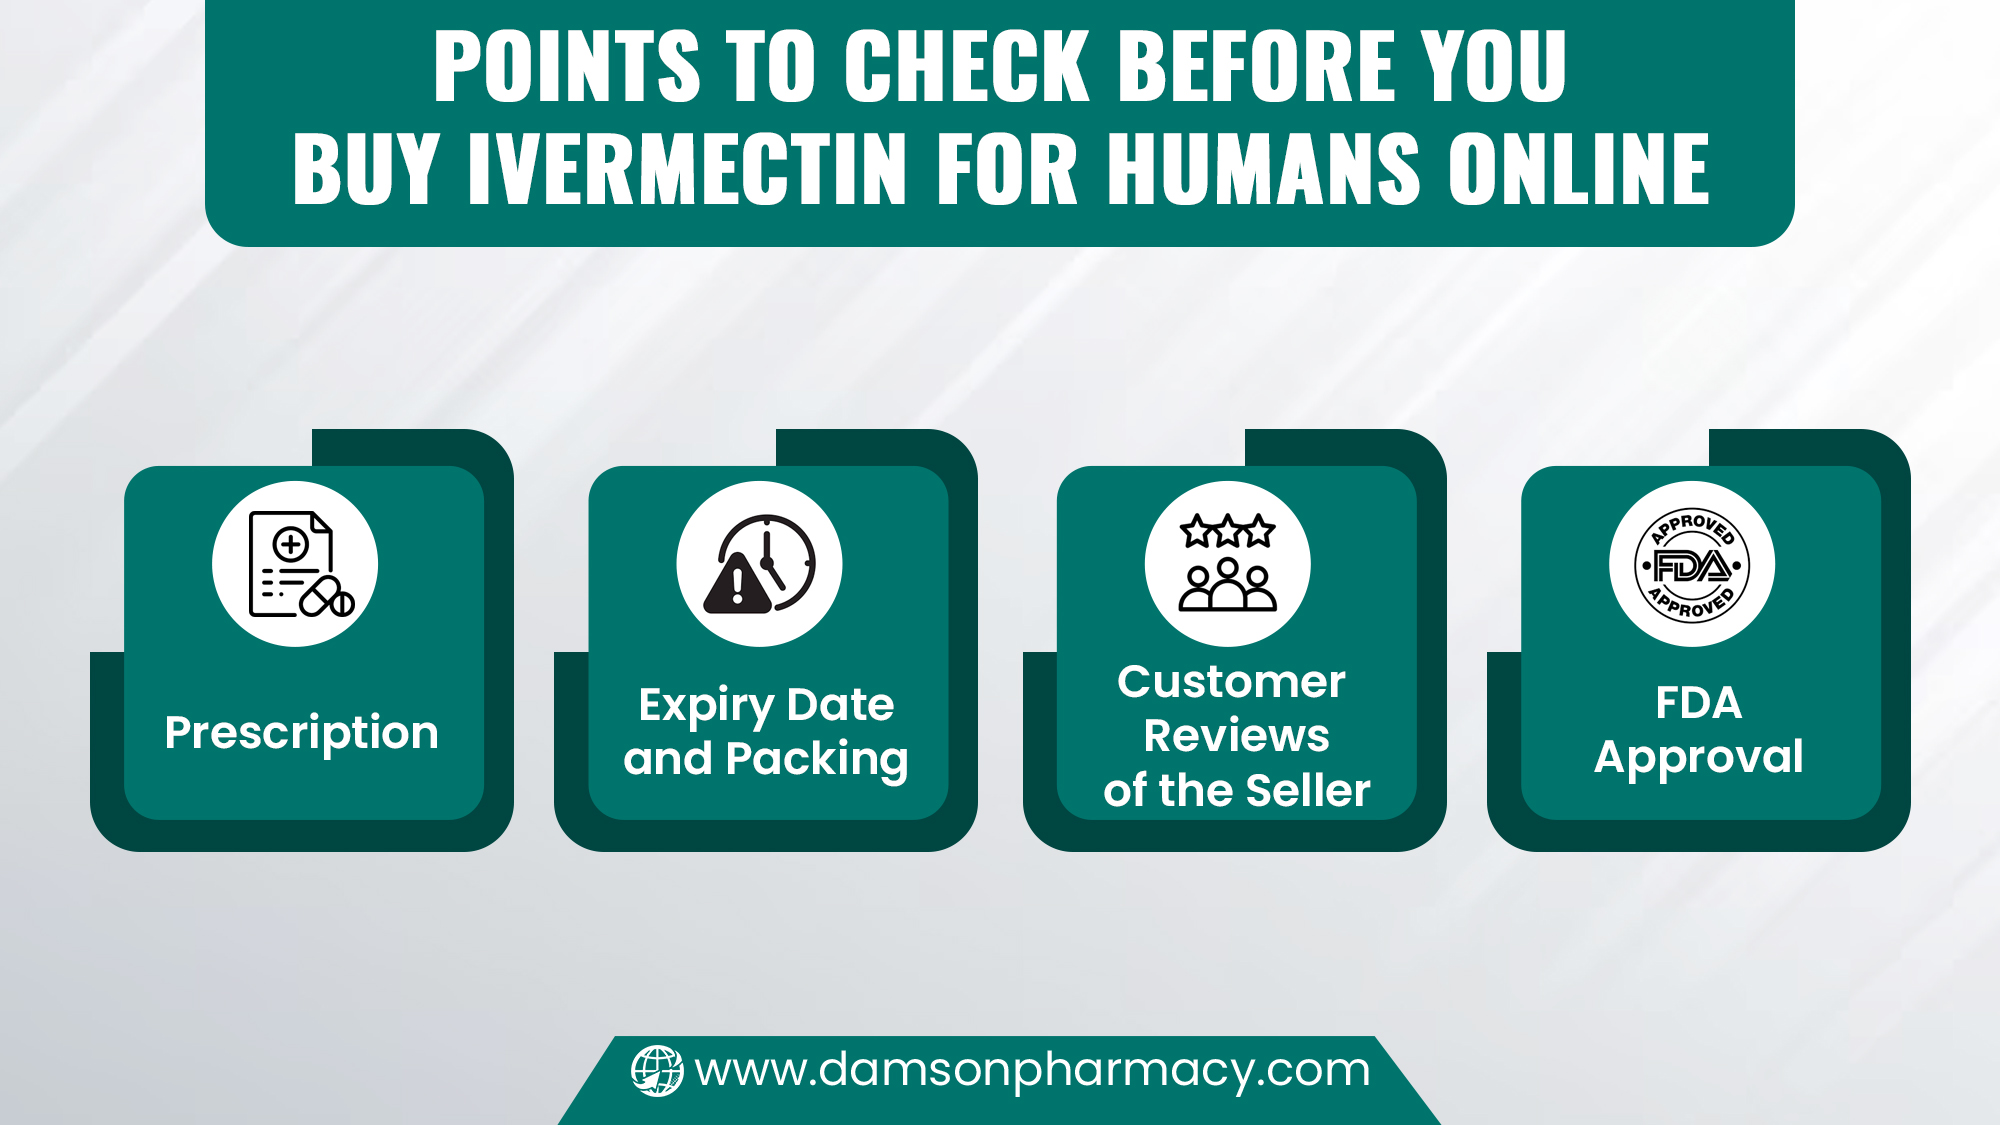 Points to Check Before You Buy Ivermectin for Humans Online